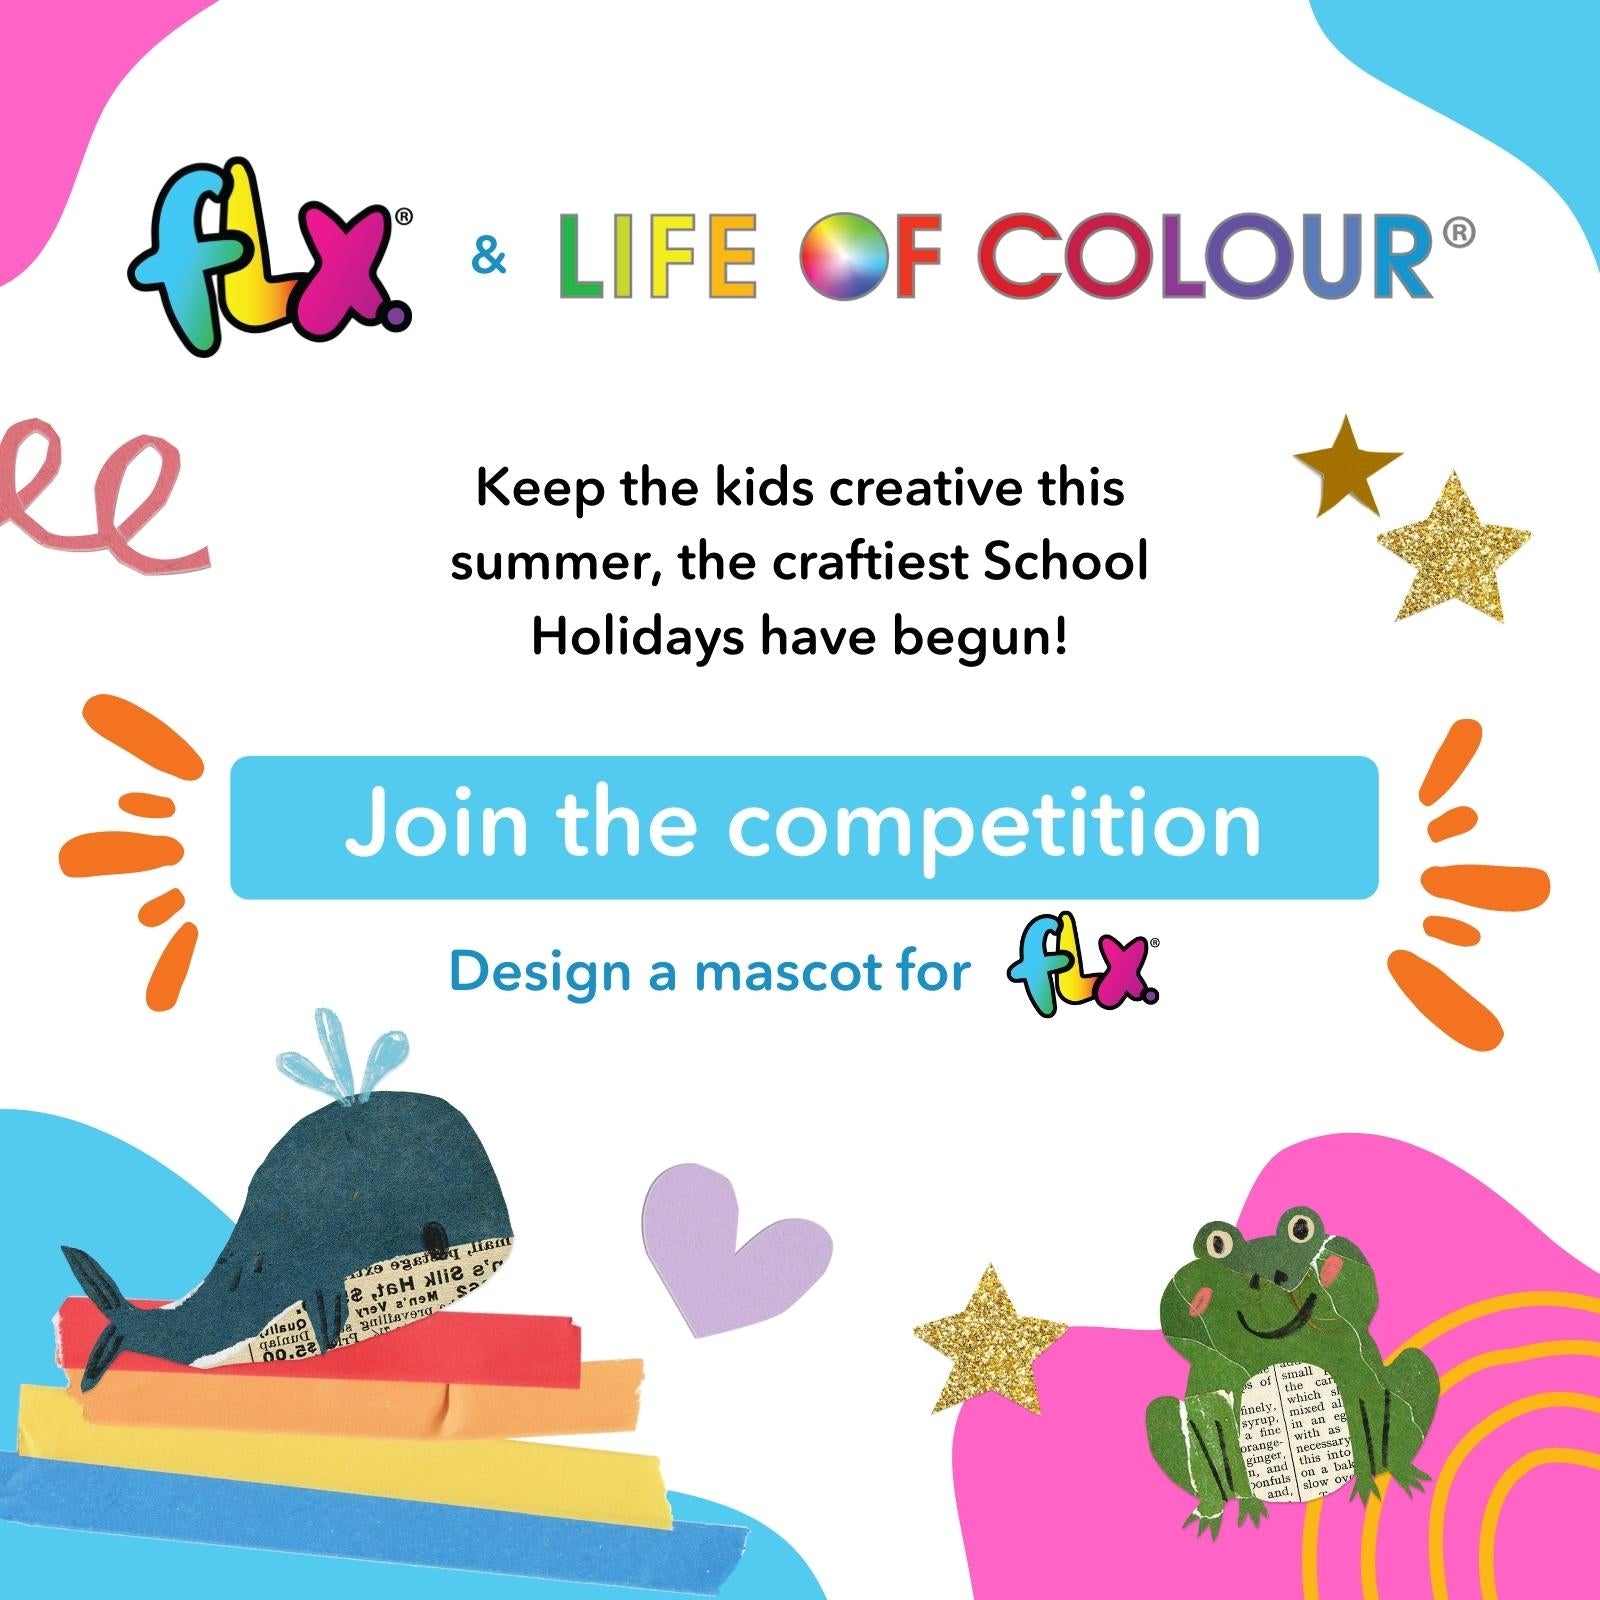 Get kids creative in the summer holidays with the FLX Mascot Competition!